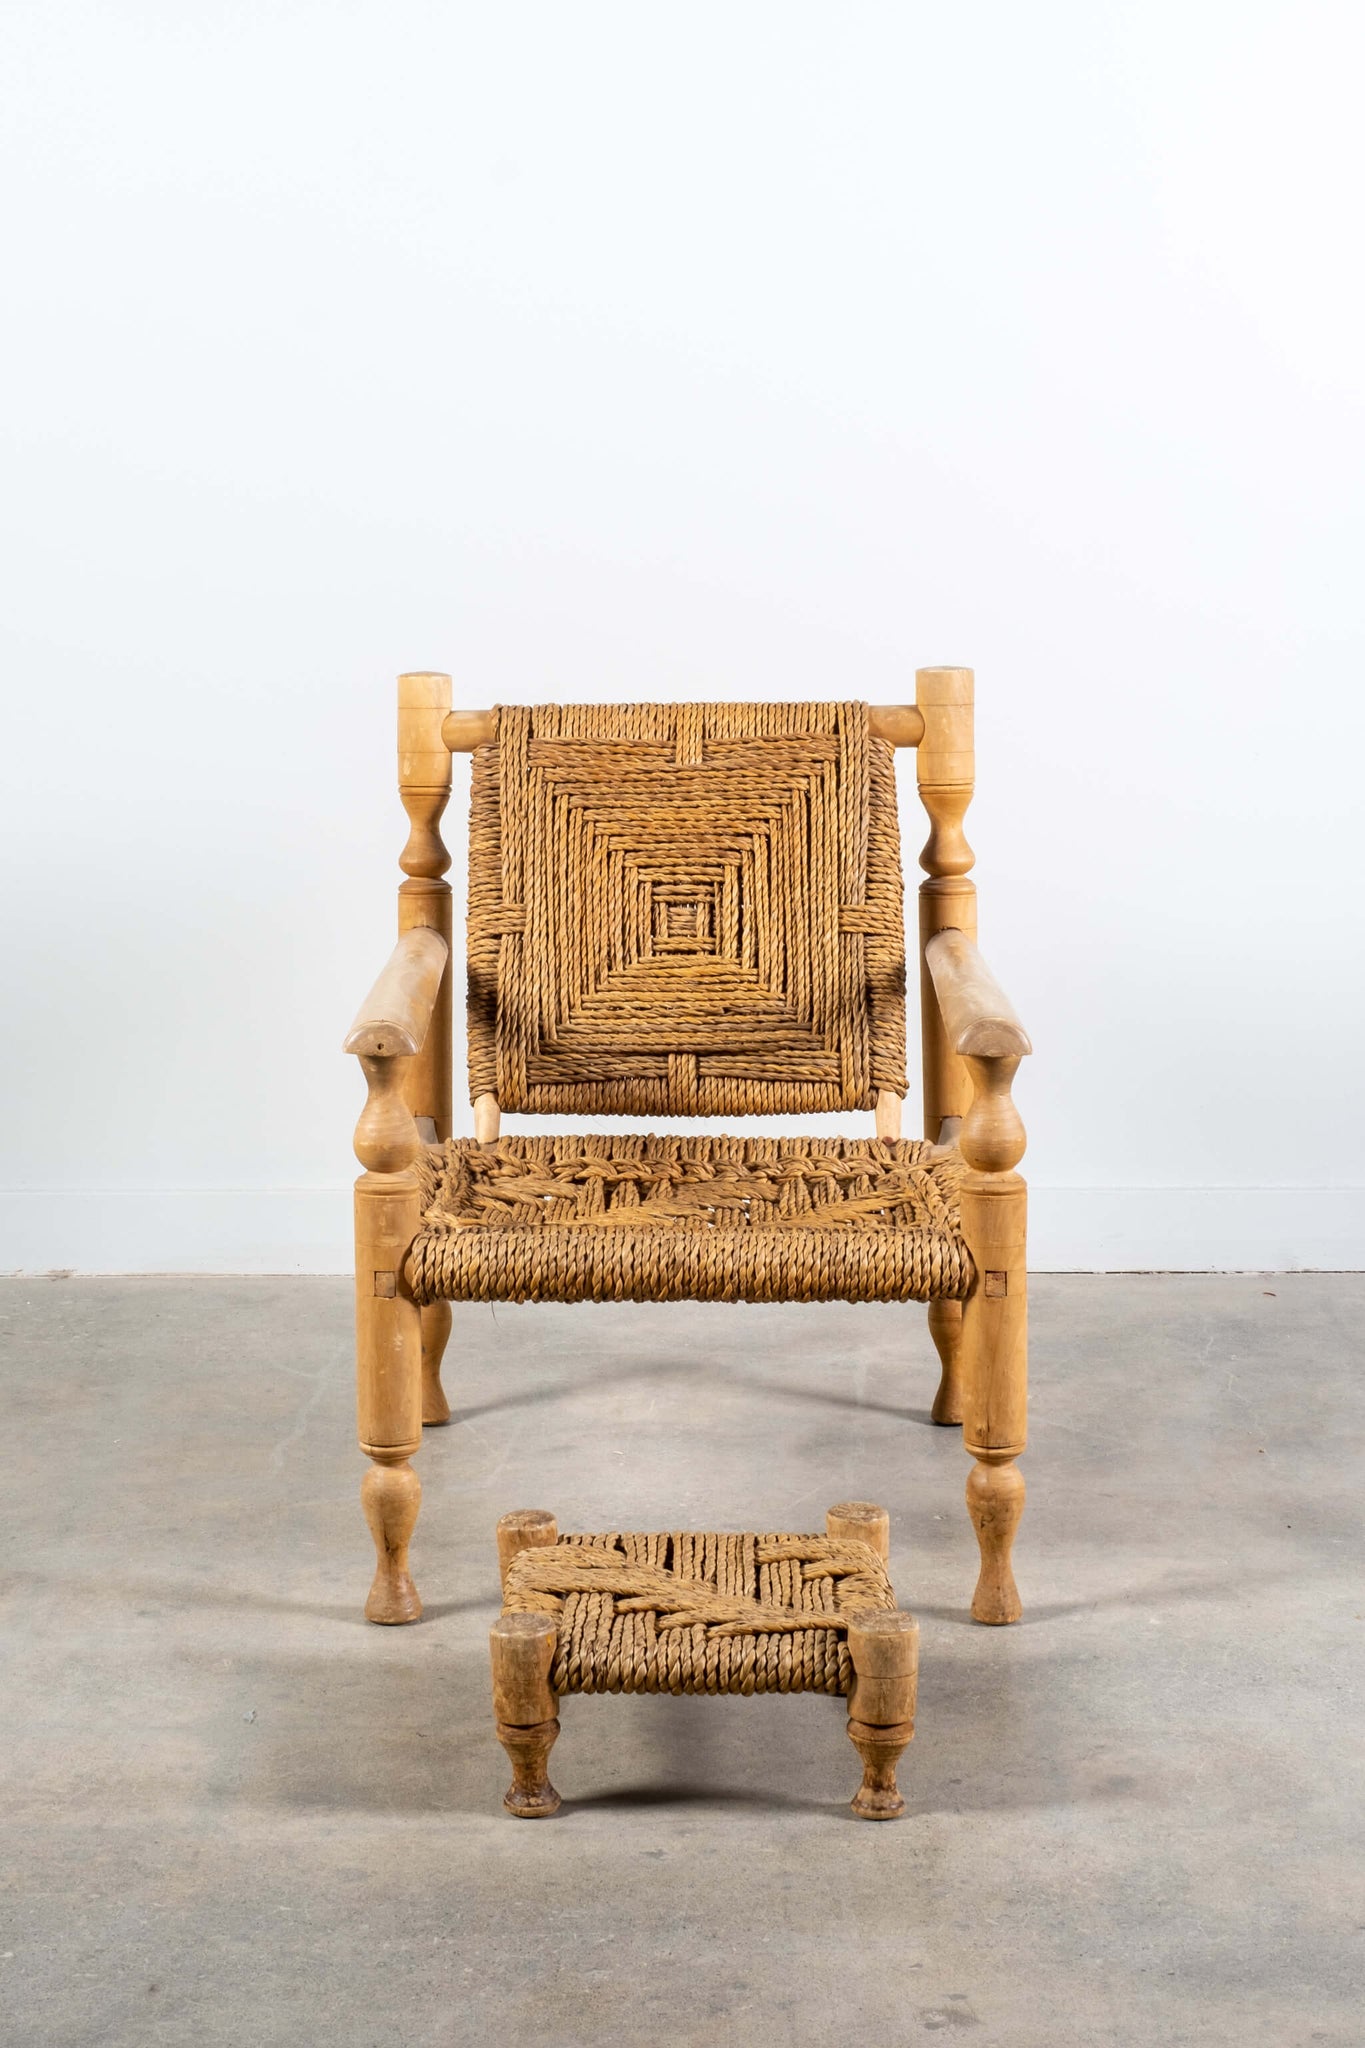 Vintage French Wood and Rope Armchairs with Footstools Adrien Audoux and Frida Minet, front view